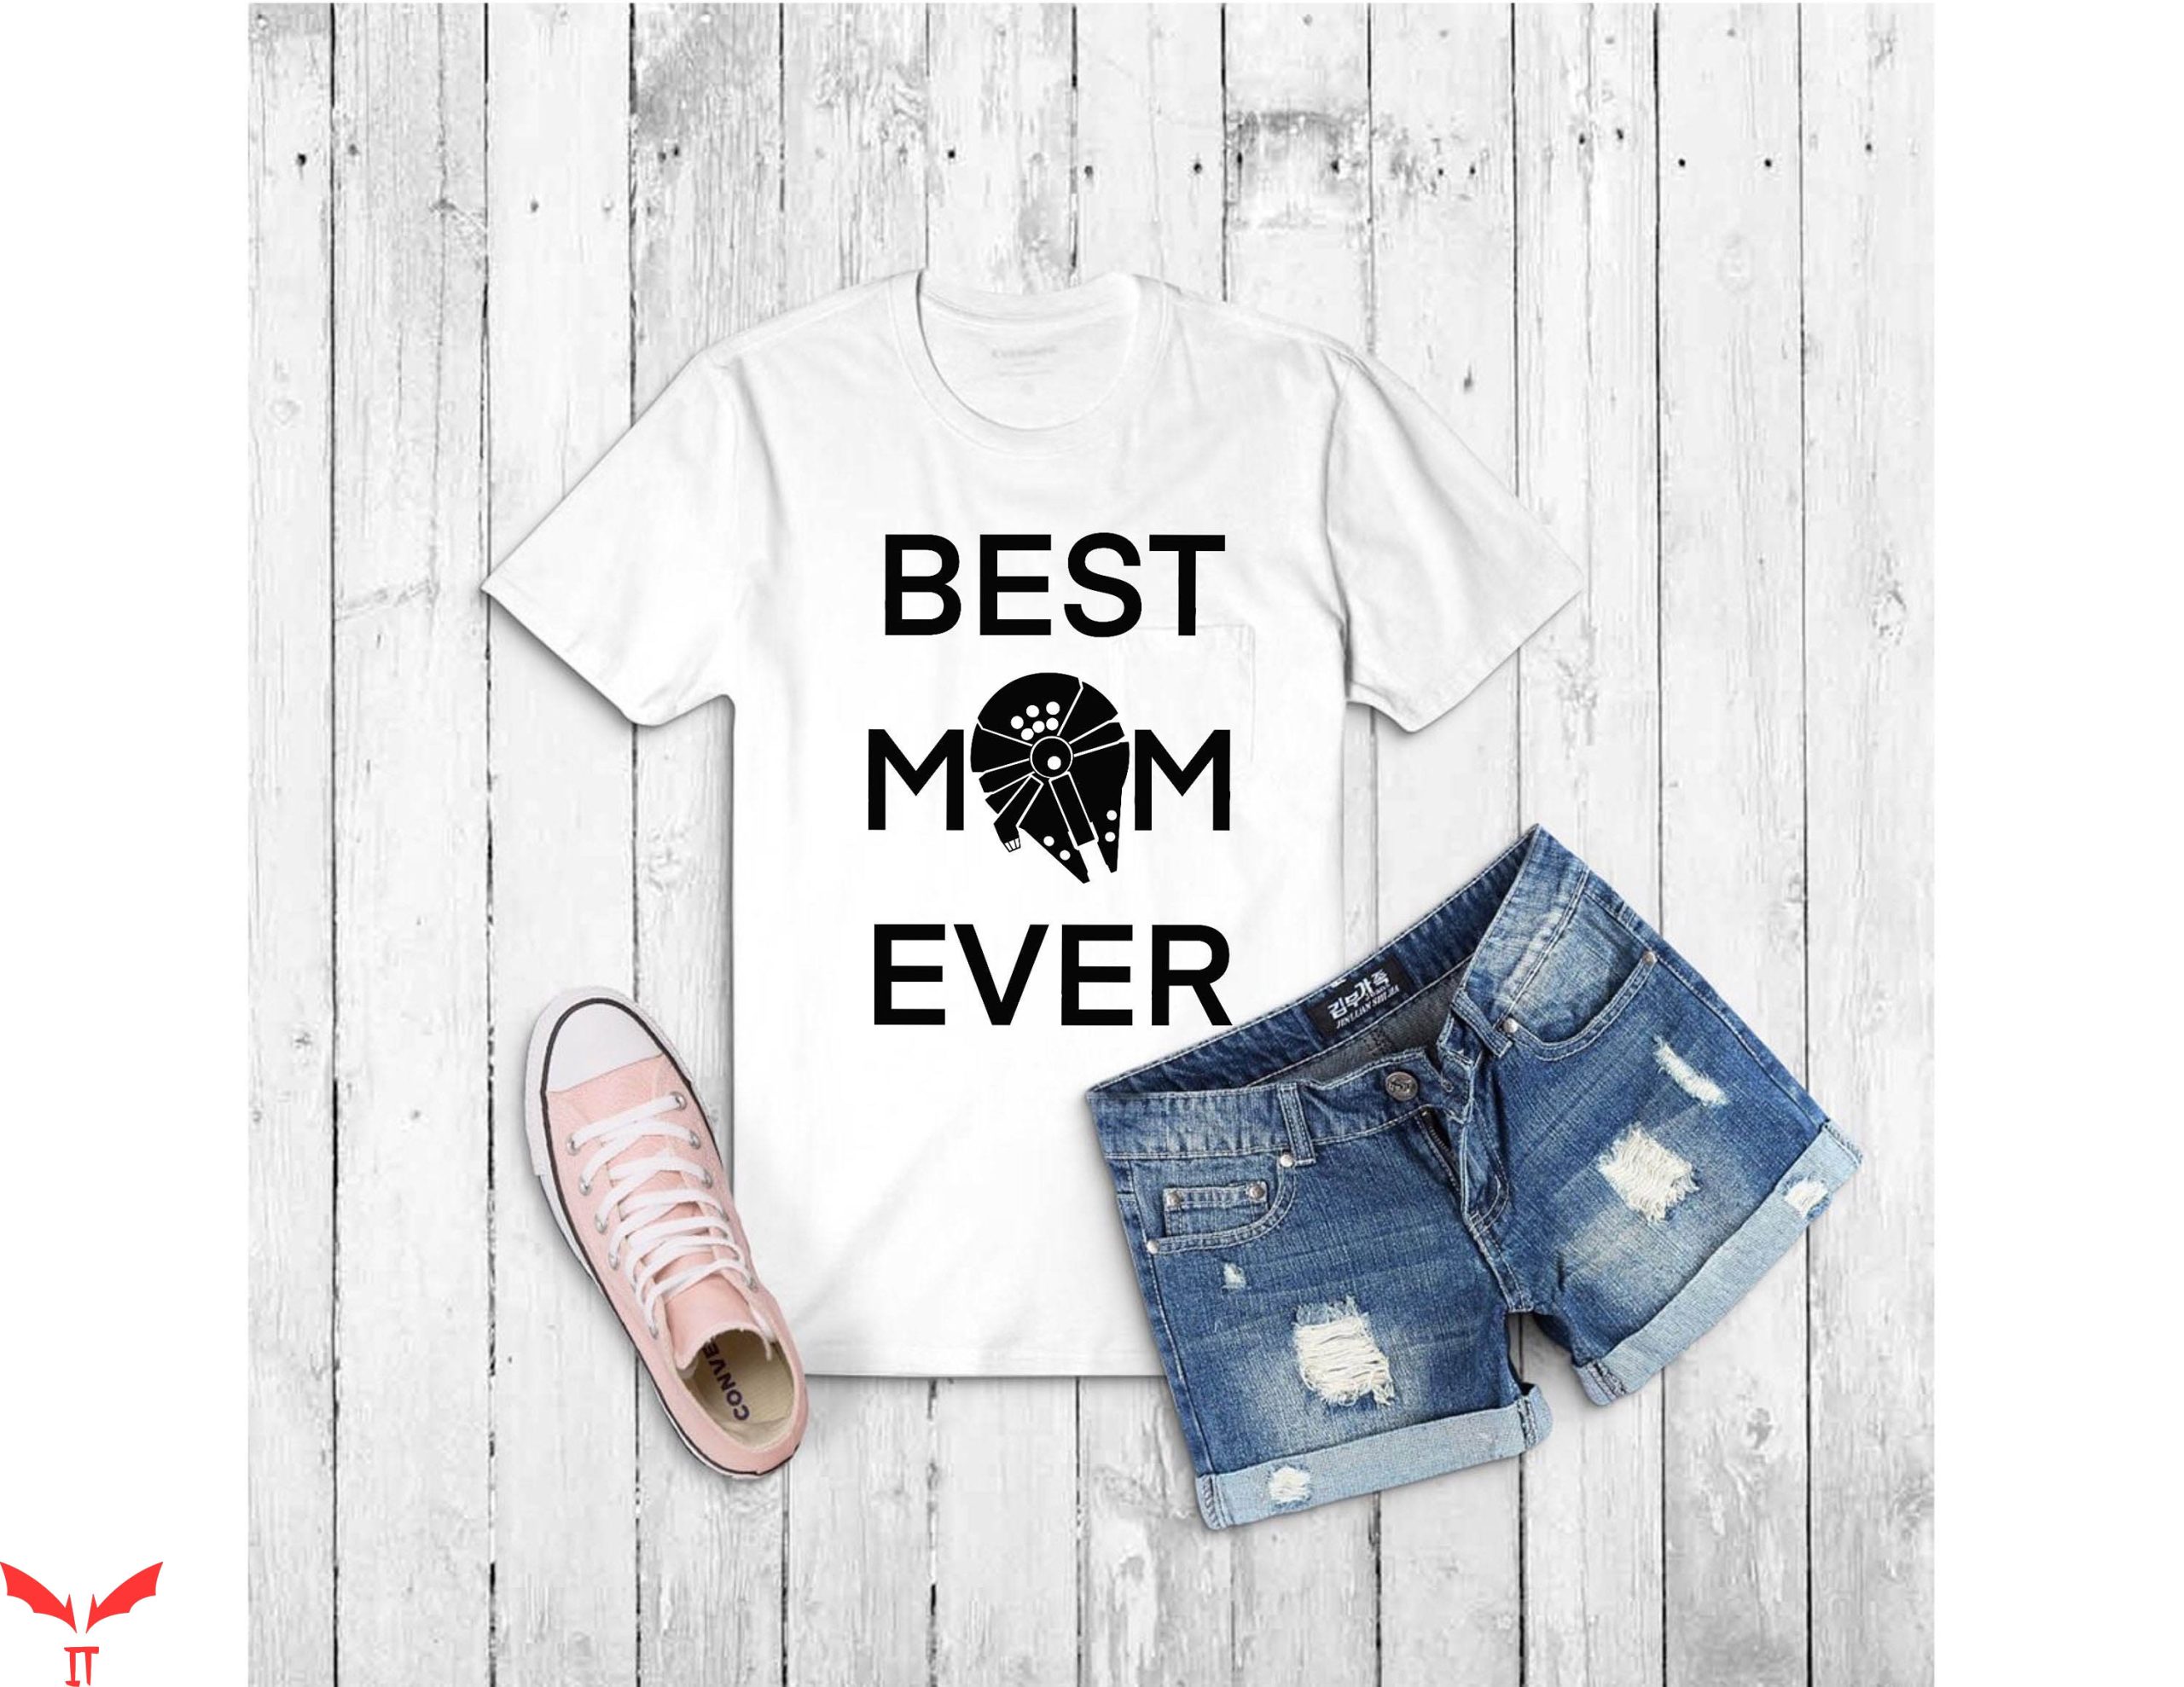 Star Wars Mom T-Shirt Best Mom Ever Mother's Day Millenium